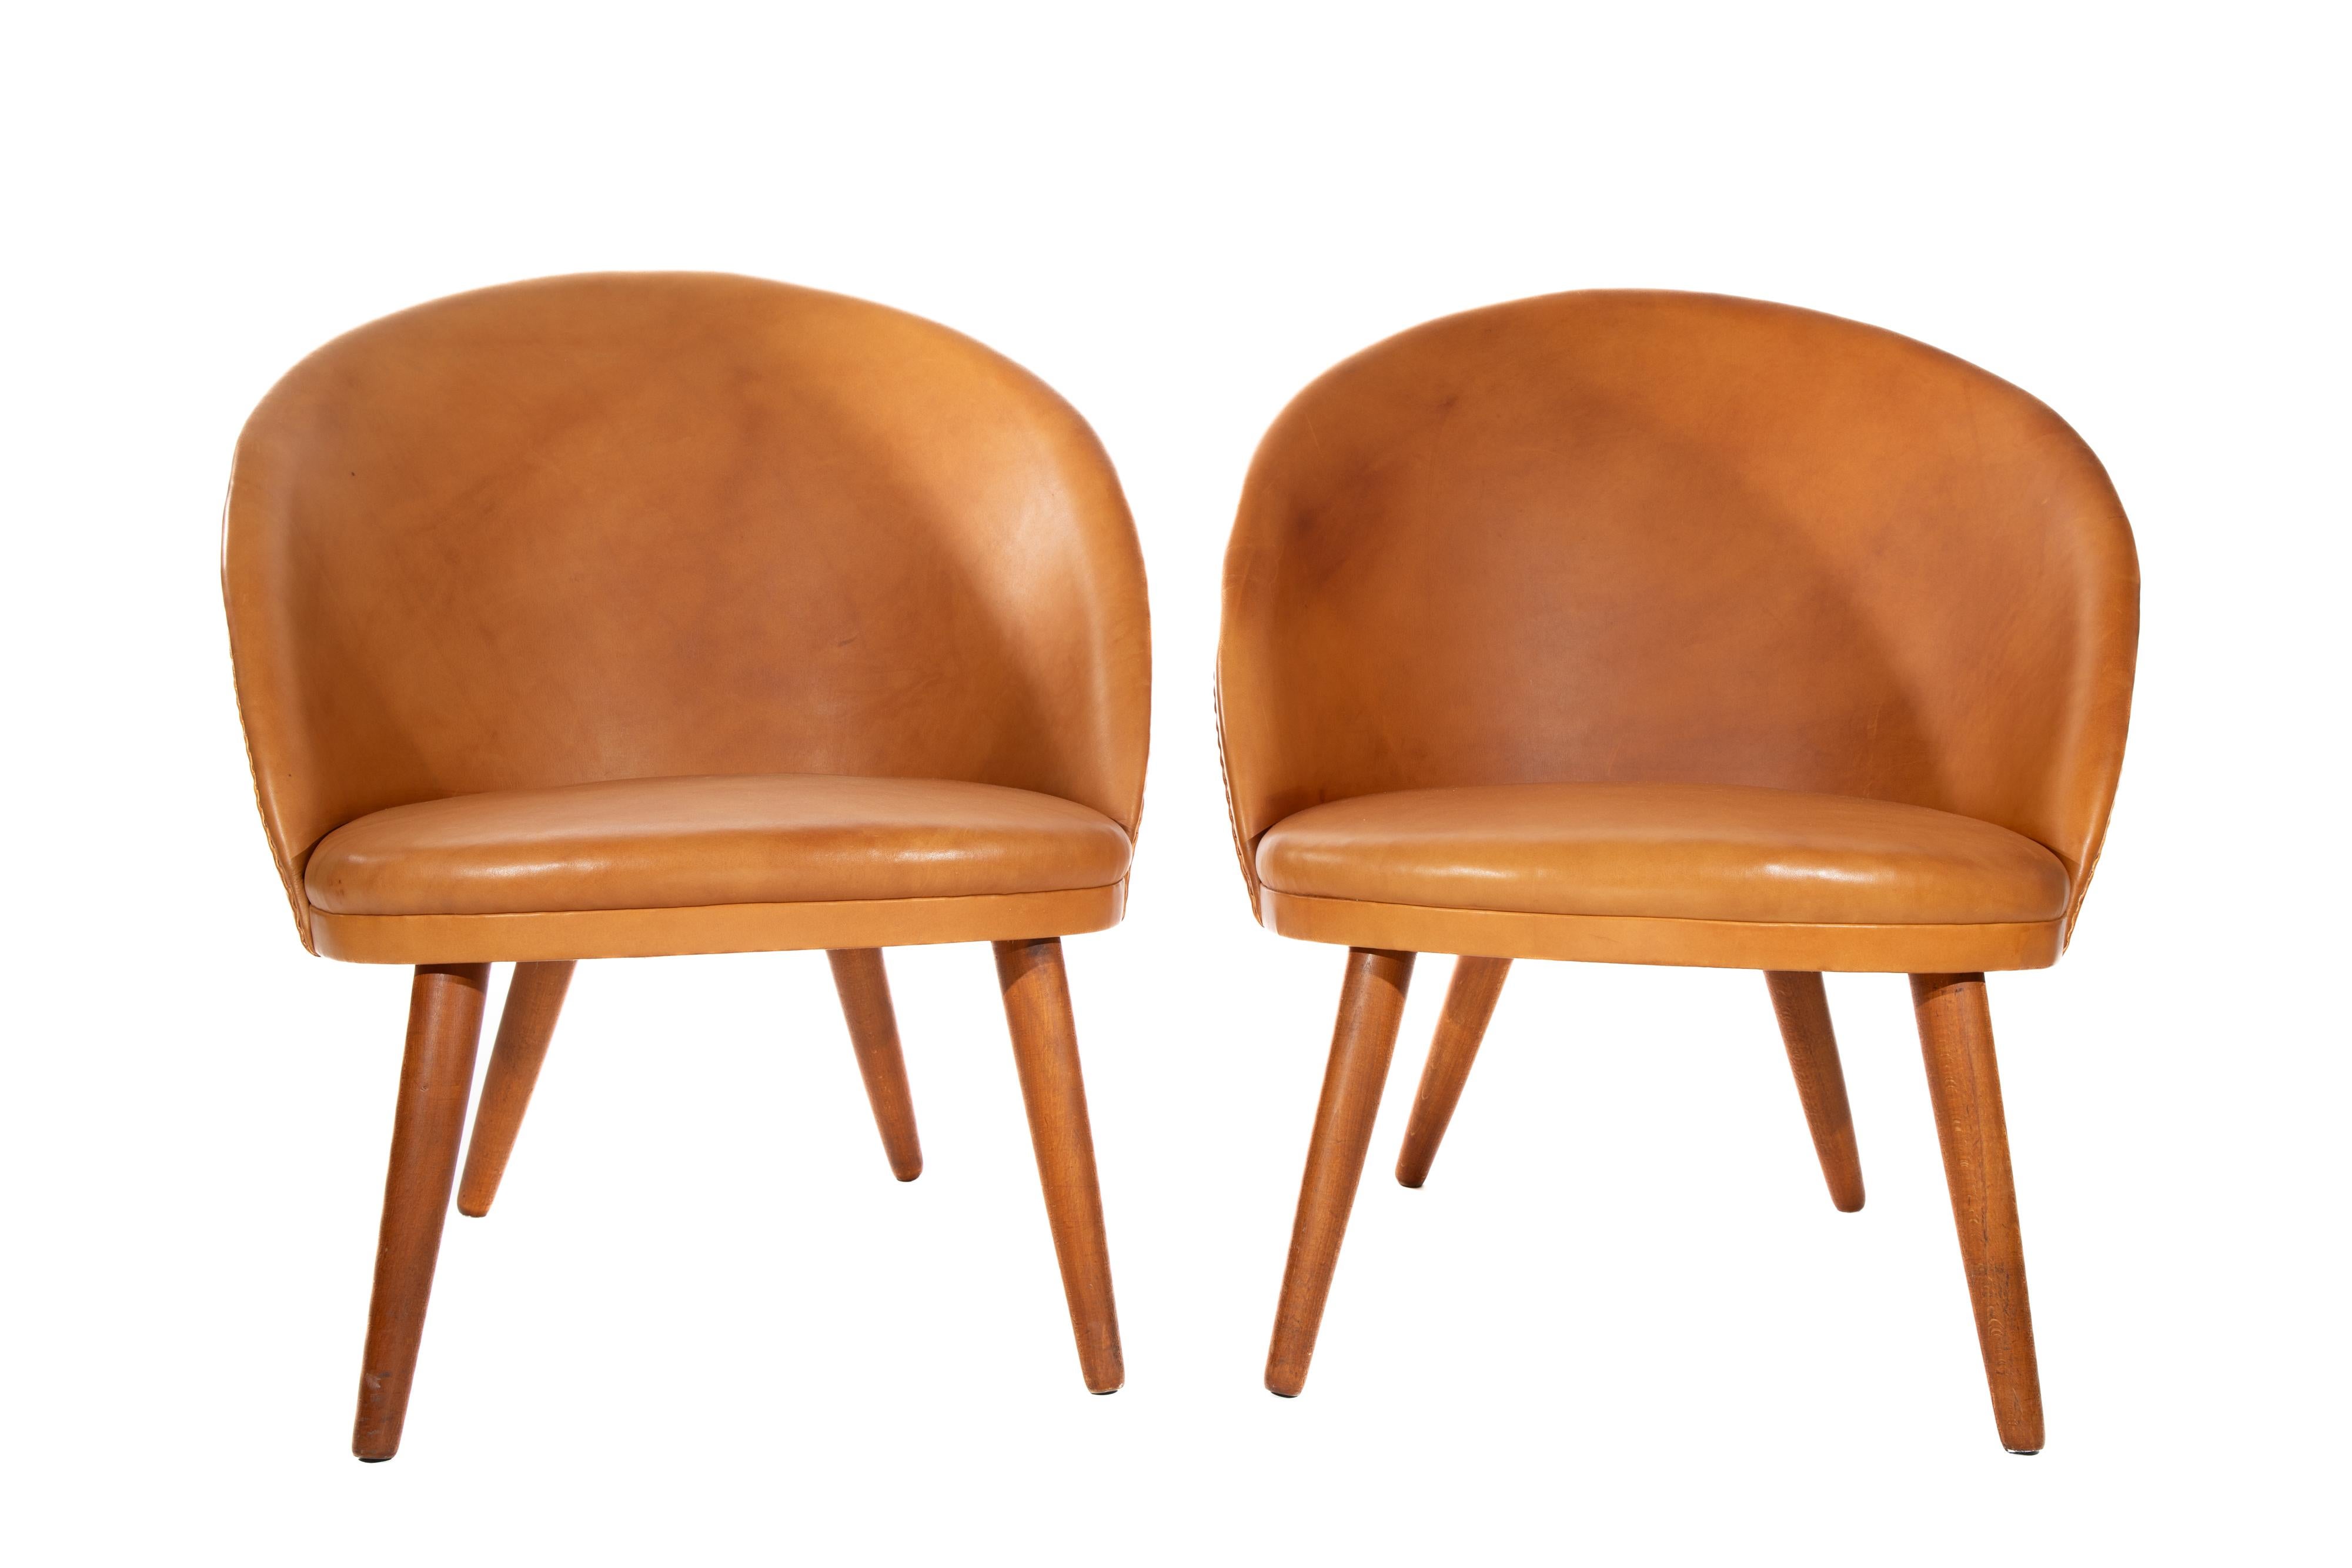 Pair of Ejvind Johannson leather and teak lounge chairs.   Model 301 
Manufactured by Godtfred H. Petersen, Denmark
C.  1950s

Newer upholstery with light wear